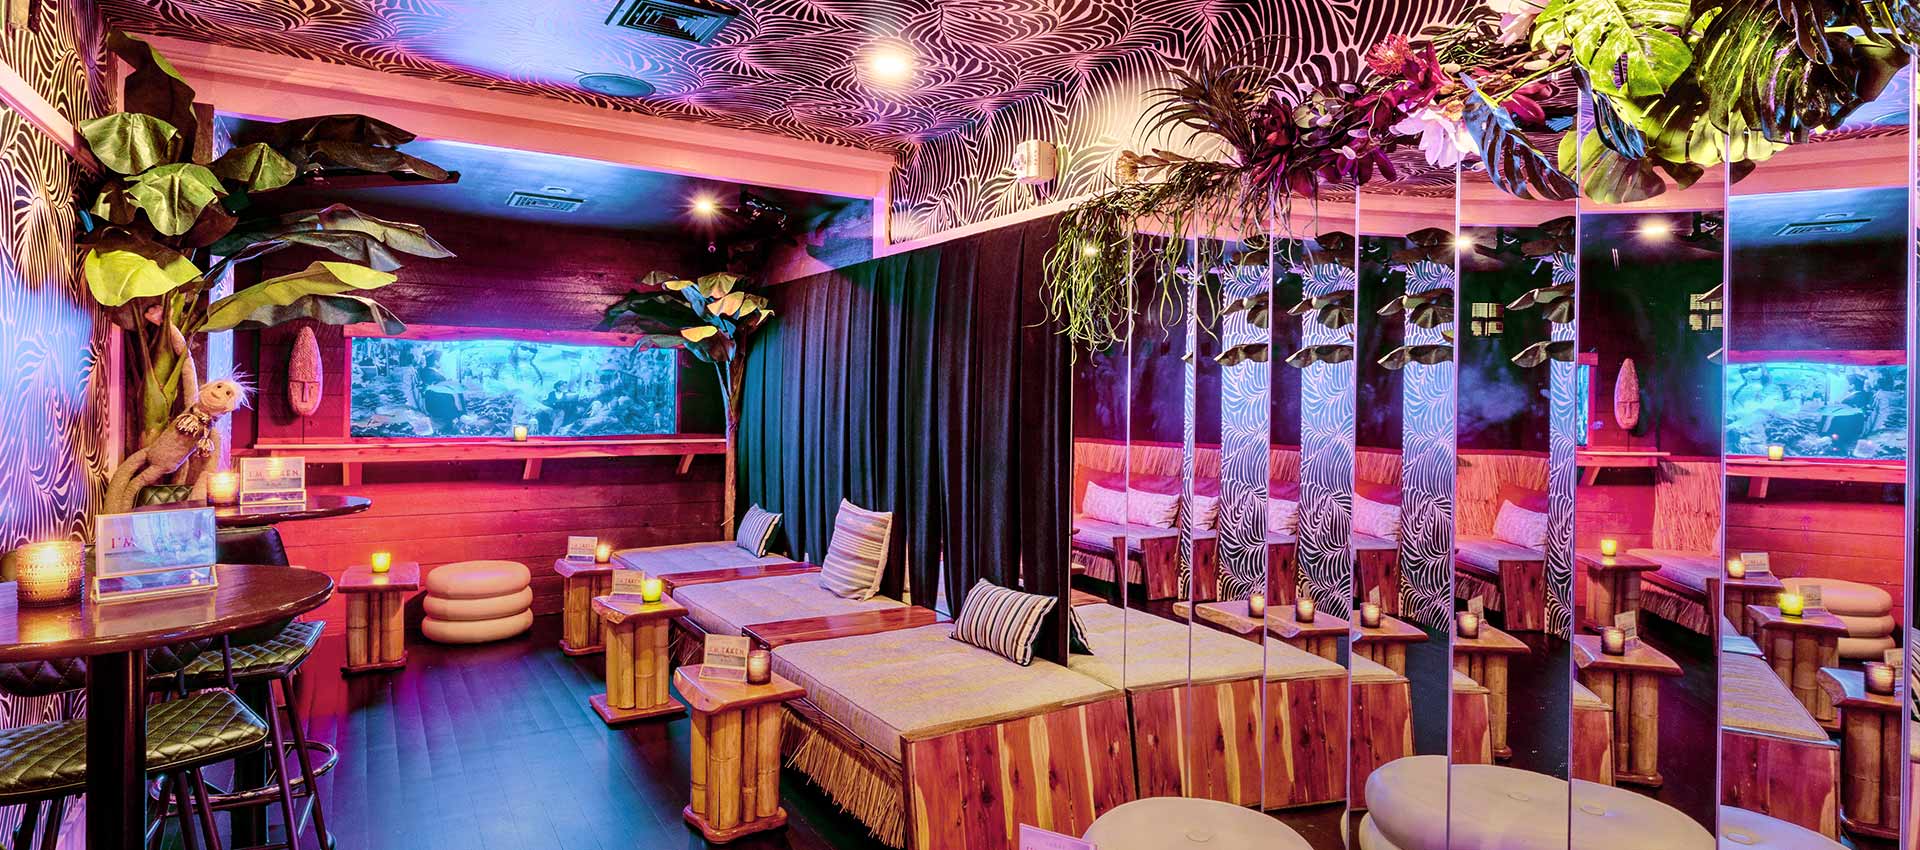 Vibrant and fun Tiki Bar table area in New York City NYC.